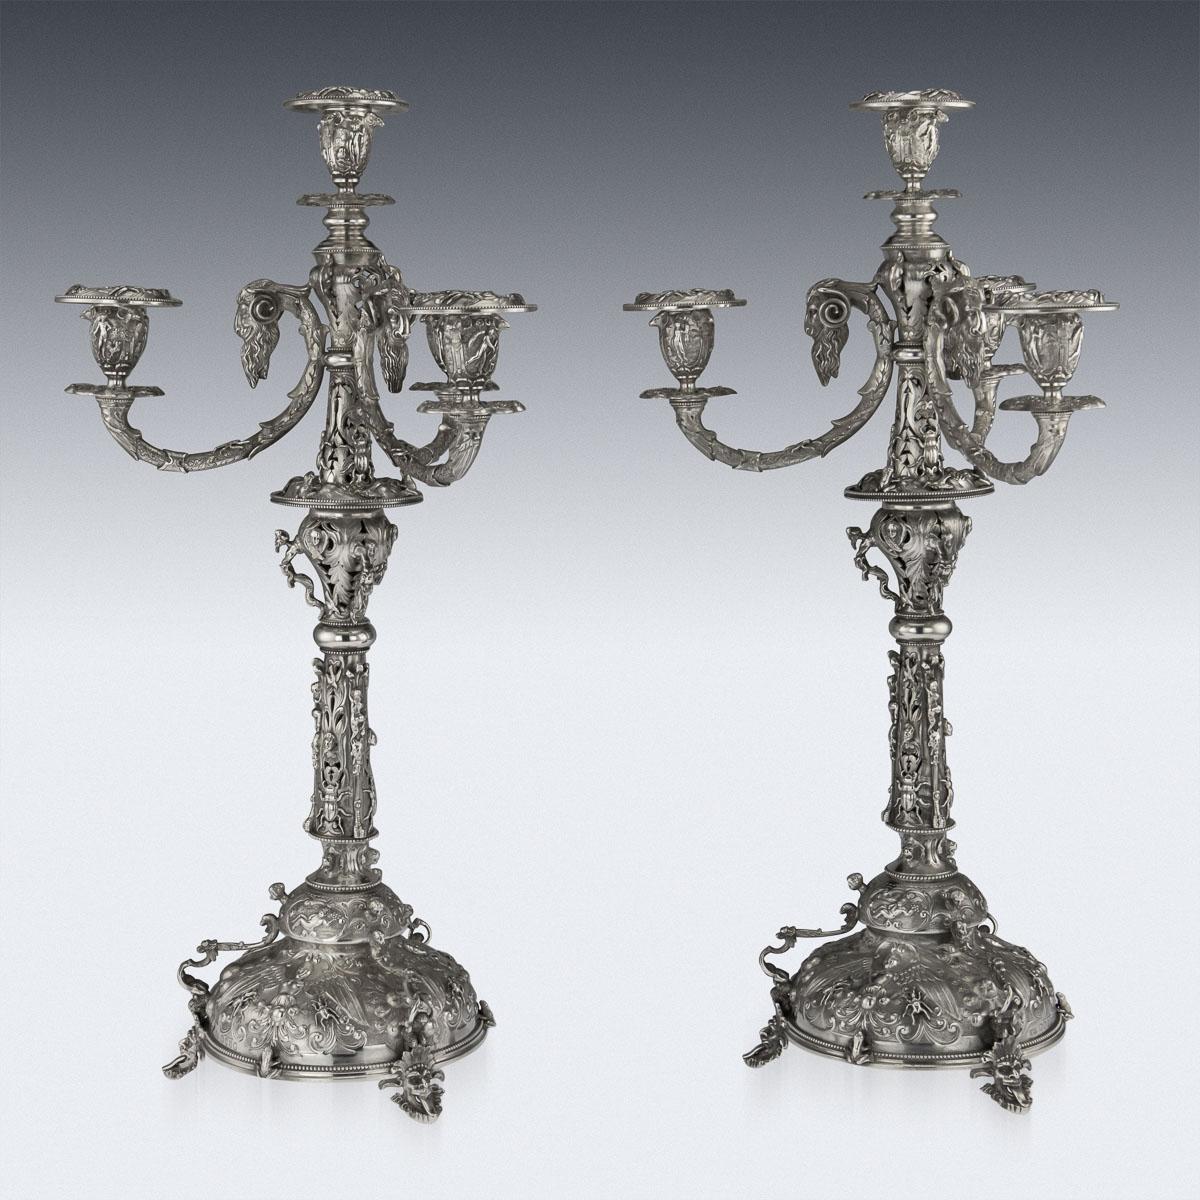 Victorian Solid Silver Set of Four Candelabras, Macrae, circa 1872-1873 For Sale 1